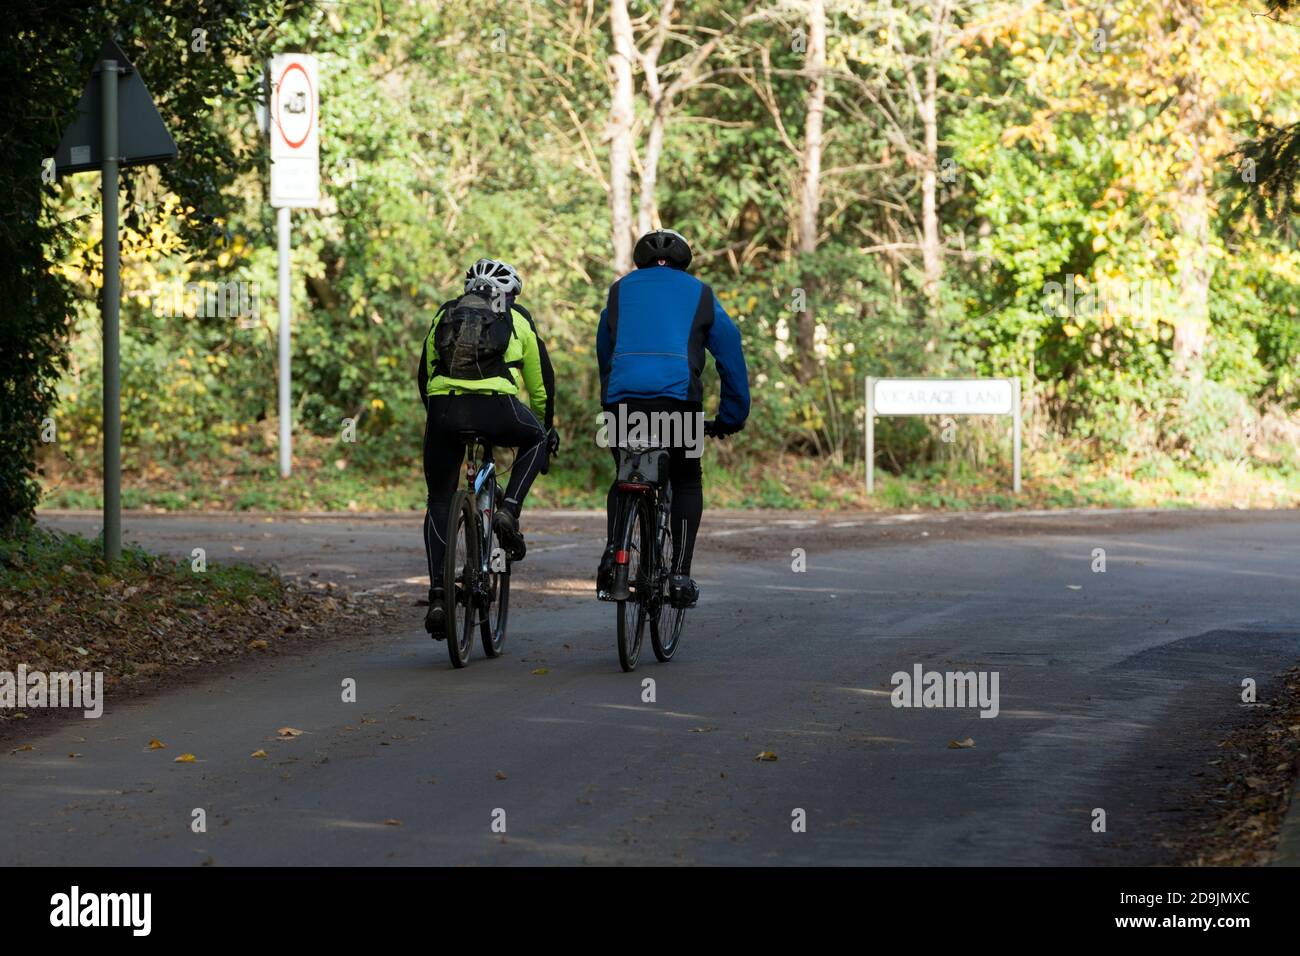 Two cyclists on a country road, Sherbourne, Warwickshire, England, UK Stock Photo